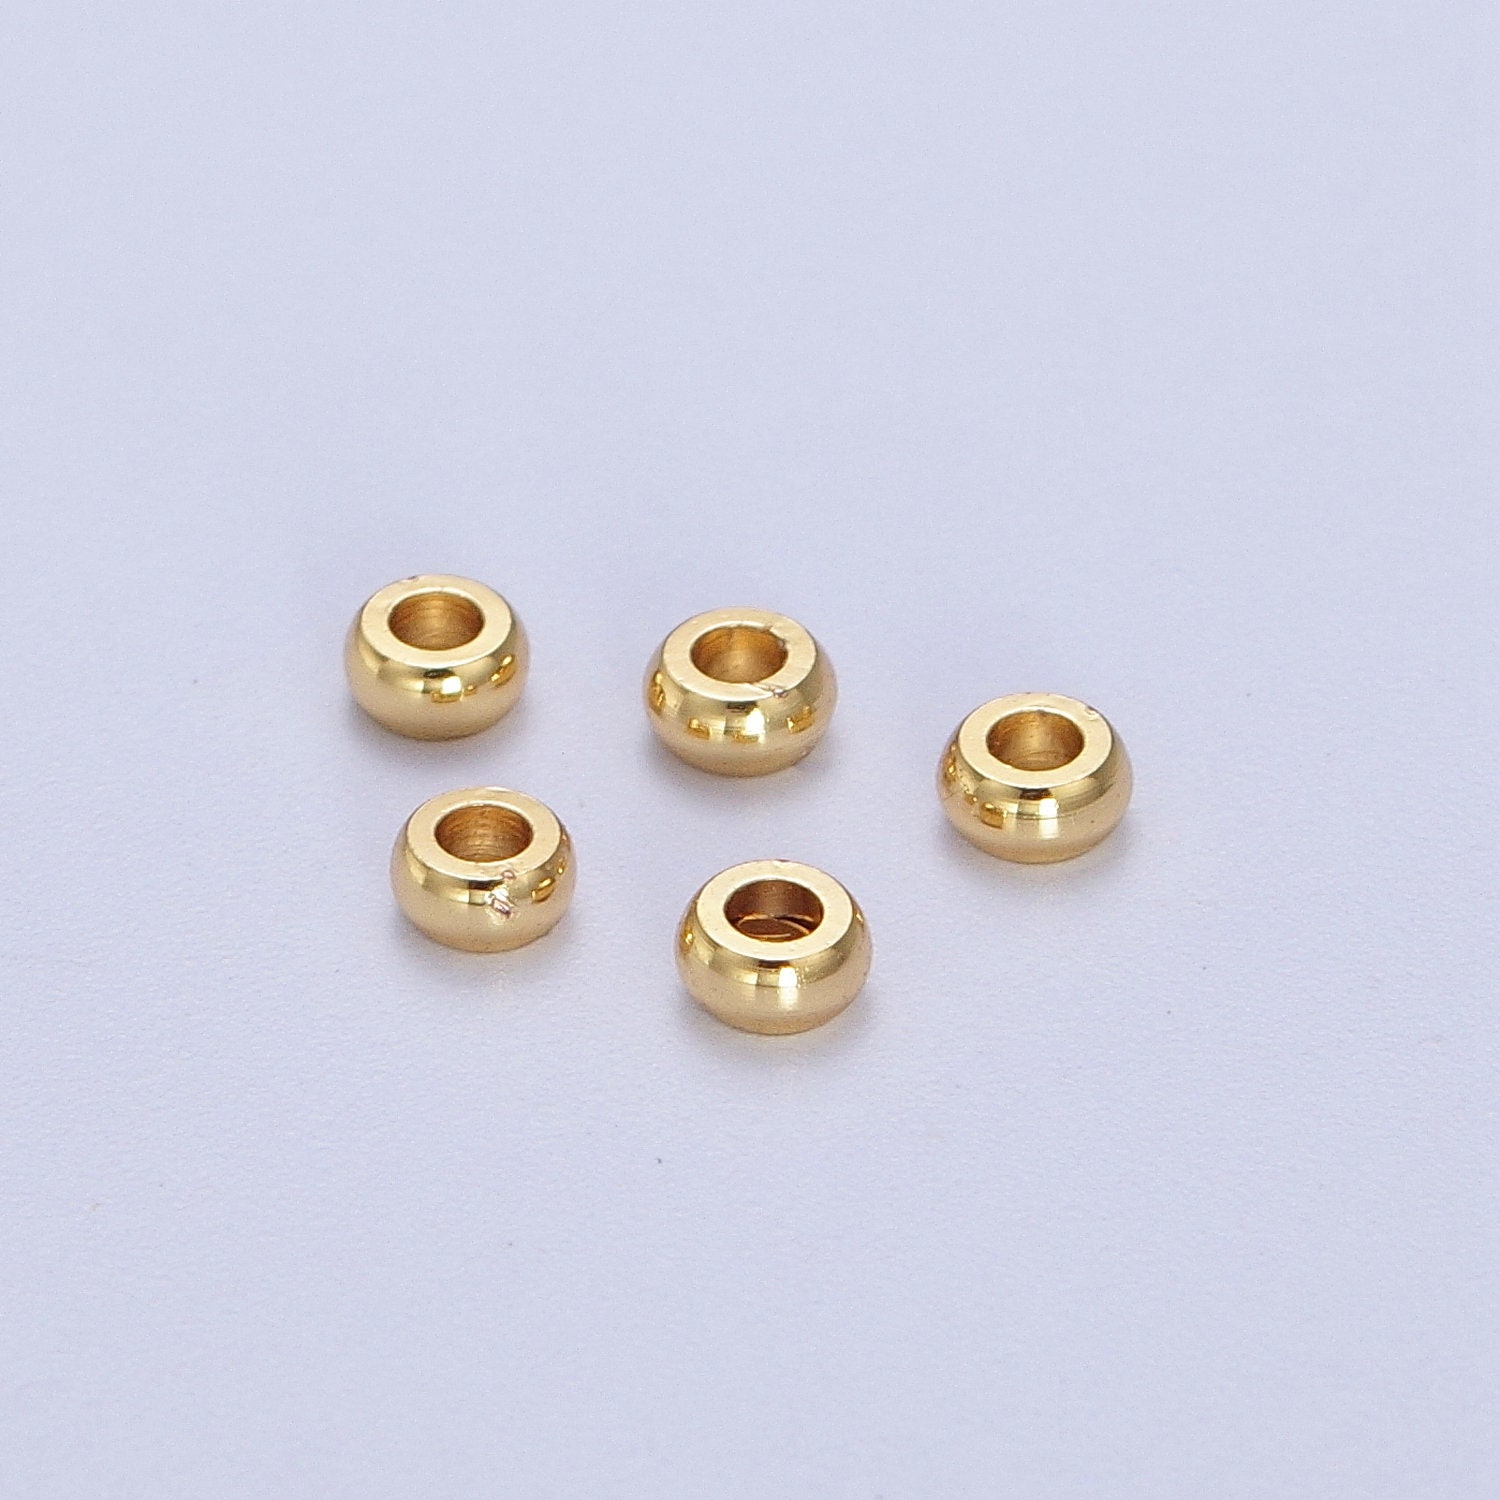 BEADIA 18K Gold Plated Round Spacer Beads 5mm 60pcs for Jewelry Making  Findings Non Tarnish